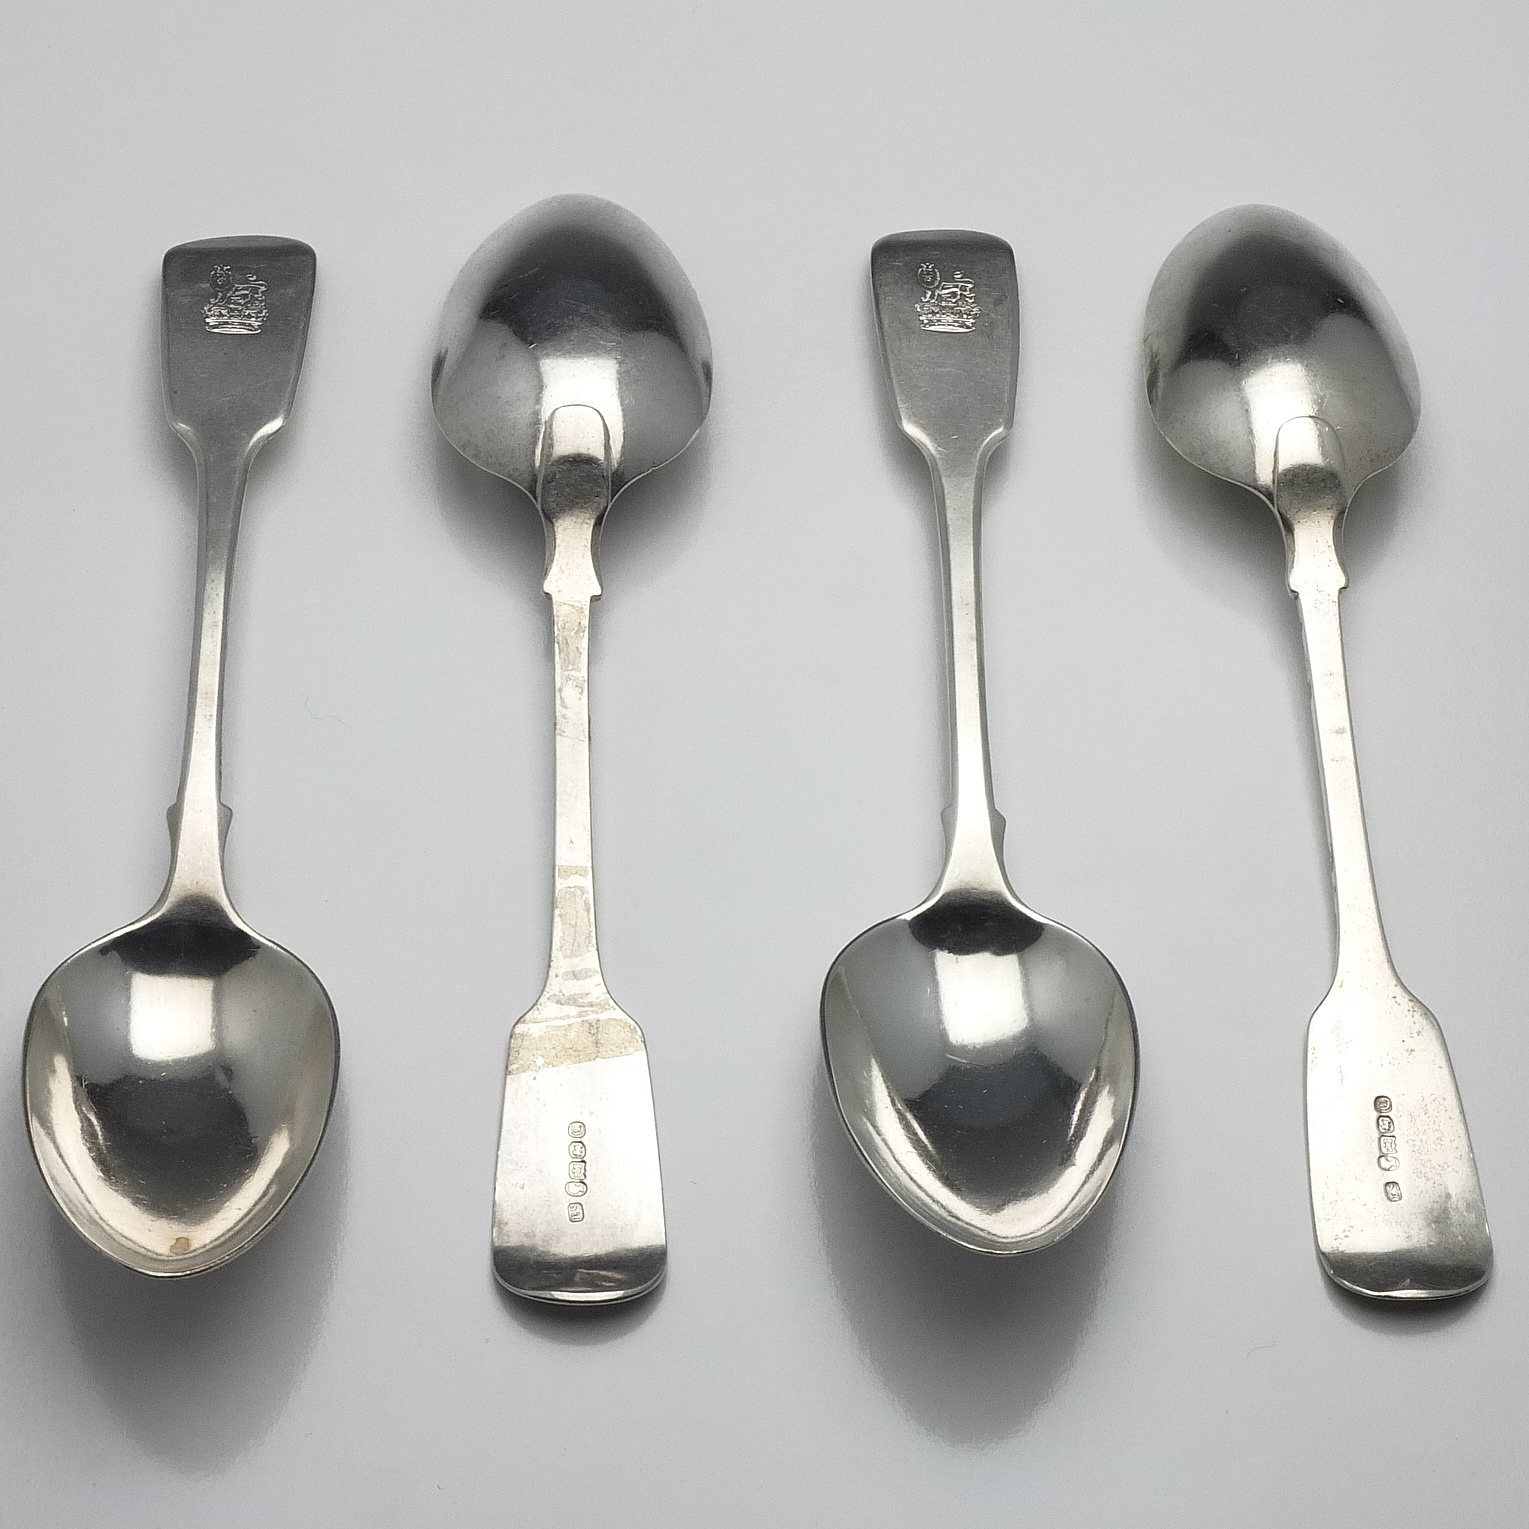 'Four Victorian Crested Sterling Silver Table Spoons Edwin Henry Sweet Exeter 1839'